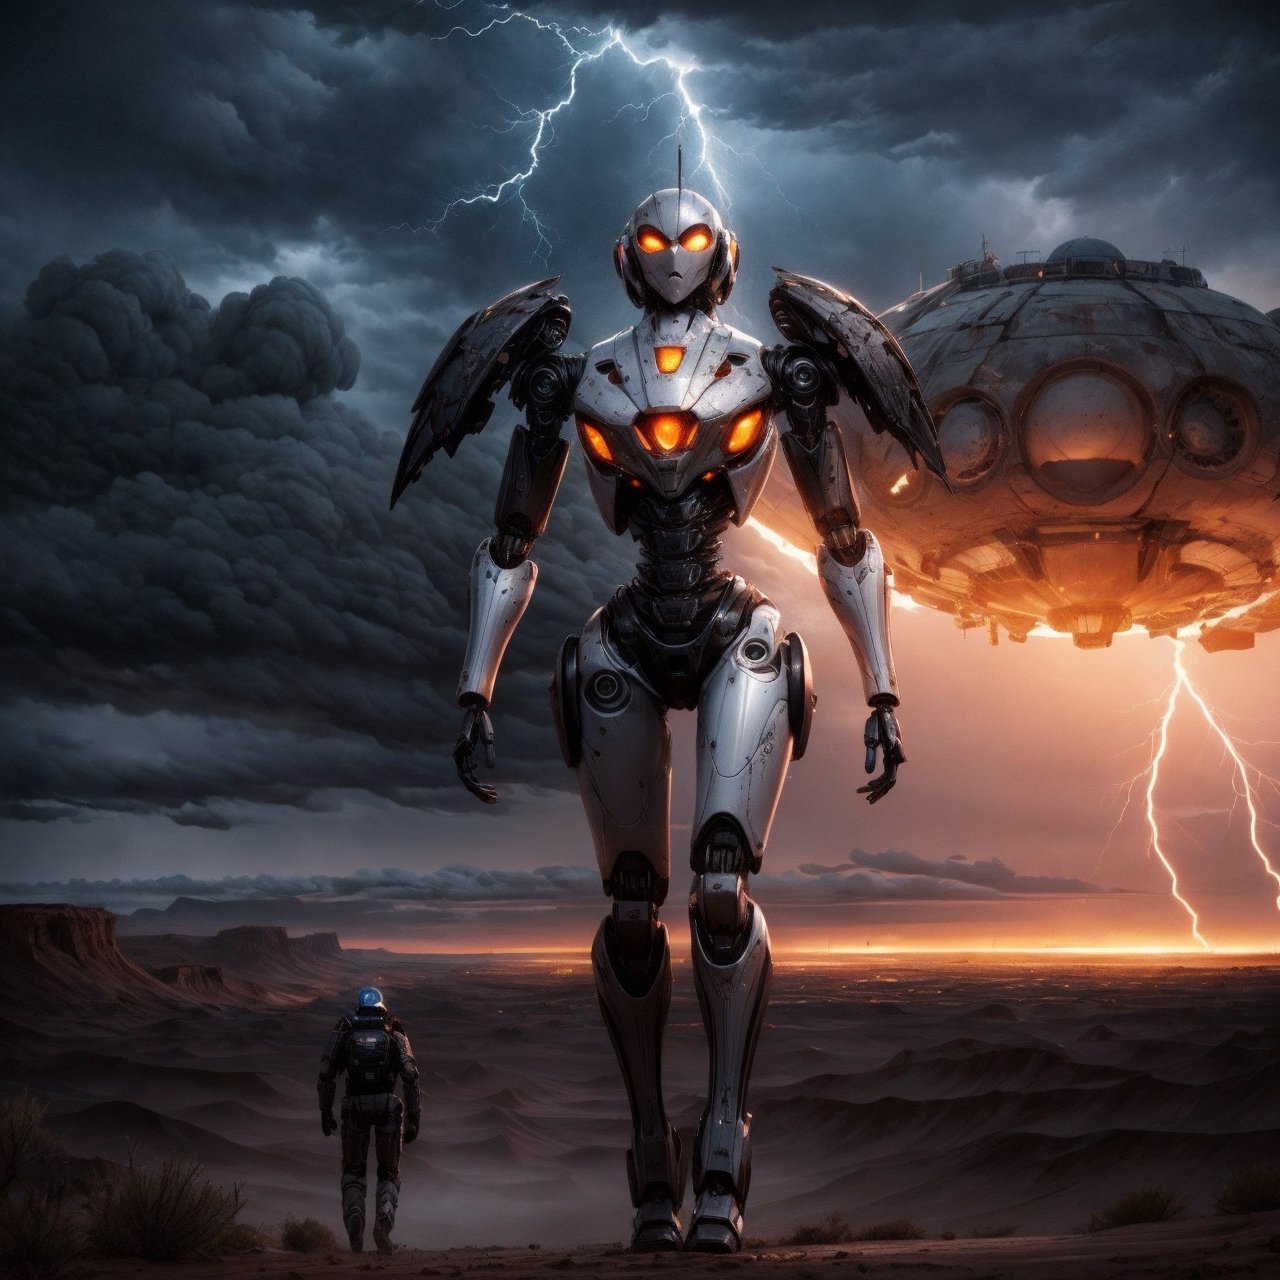 a giant, 20 ft tall android humanoid shaped robot is walking across the desert menacing. the android is metallic and machine like, rusty parts, shiny metal. a beautiful female human explorer is sitting on the robots shoulder showing the way forward. a detailed background of a vast alien desert landscape, sandstone ruins, sandstone hills, red sand, a stormy sky, dark menacing storm clouds, lightening illuminating the black clouds. windy, deserted, , SD 1.5, perfect hands,